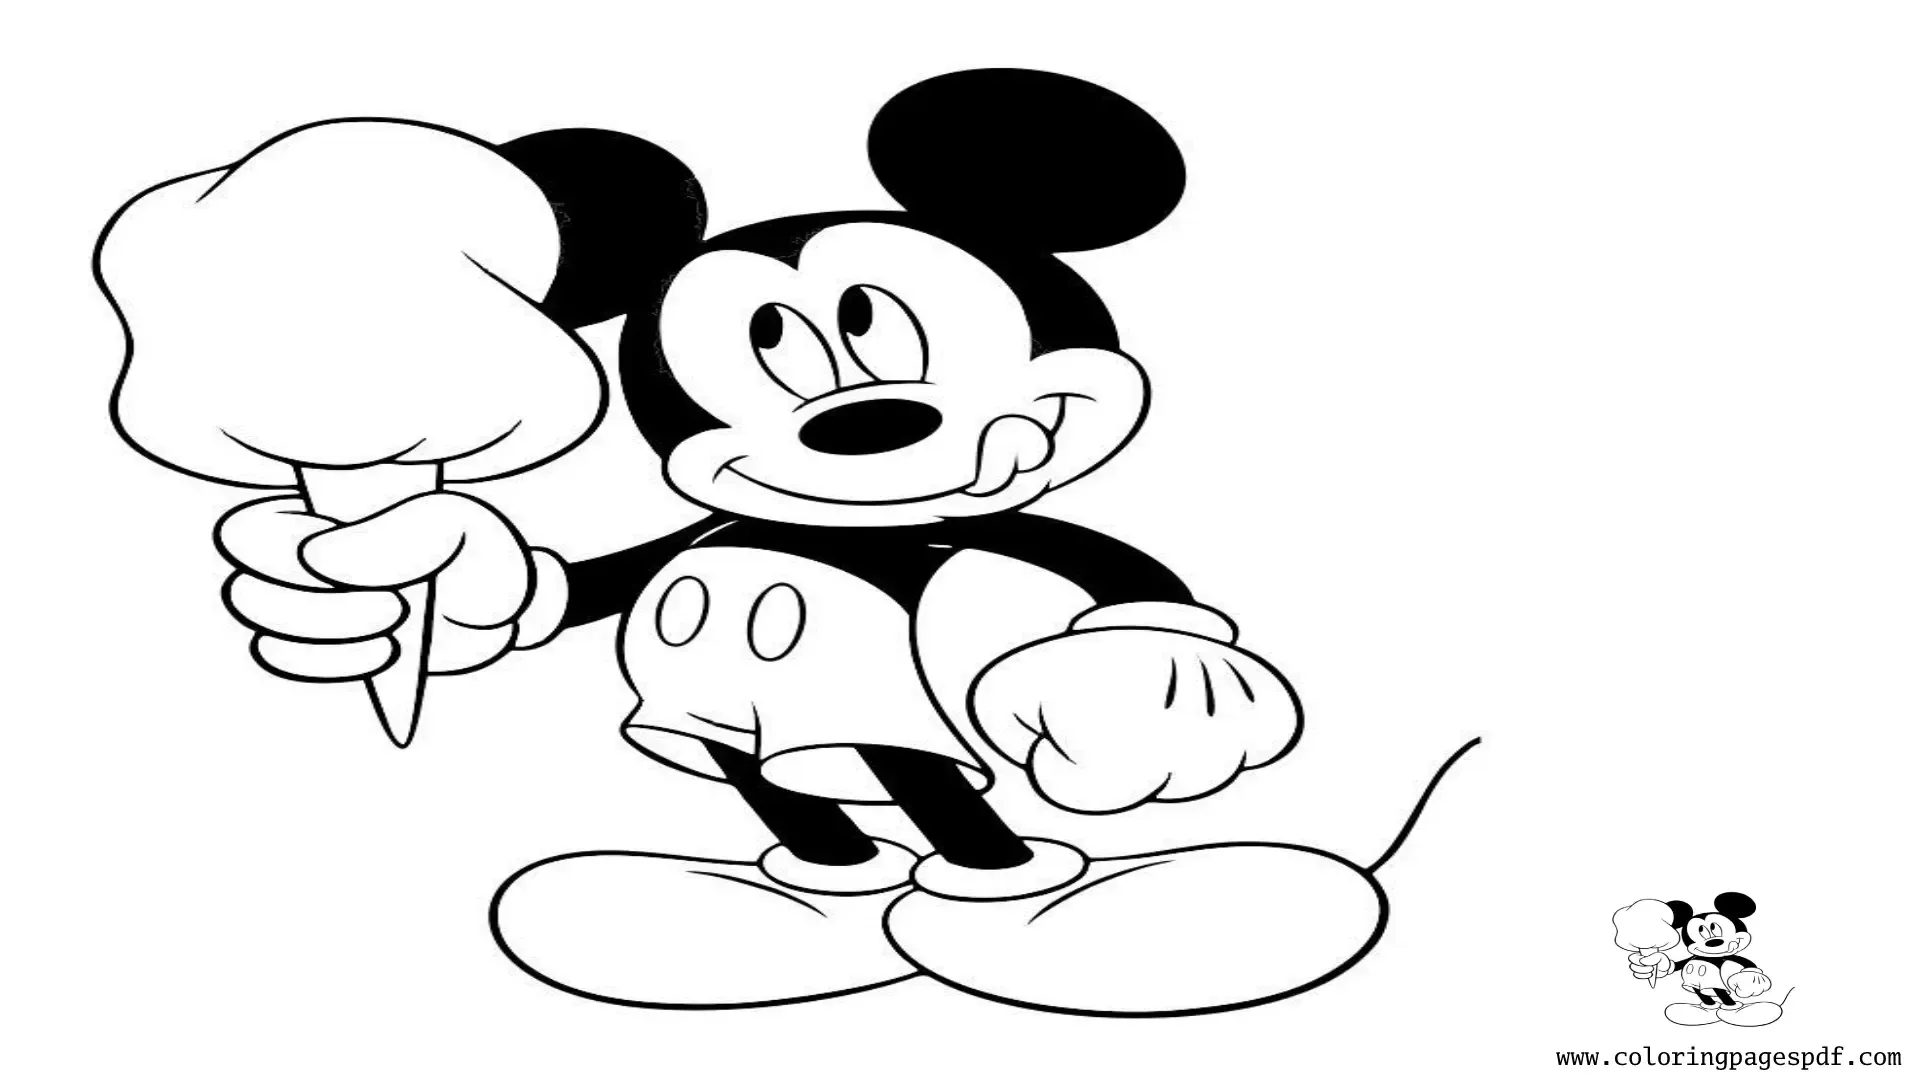 Coloring Page Of Mickey Mouse Holding Cotton Candy